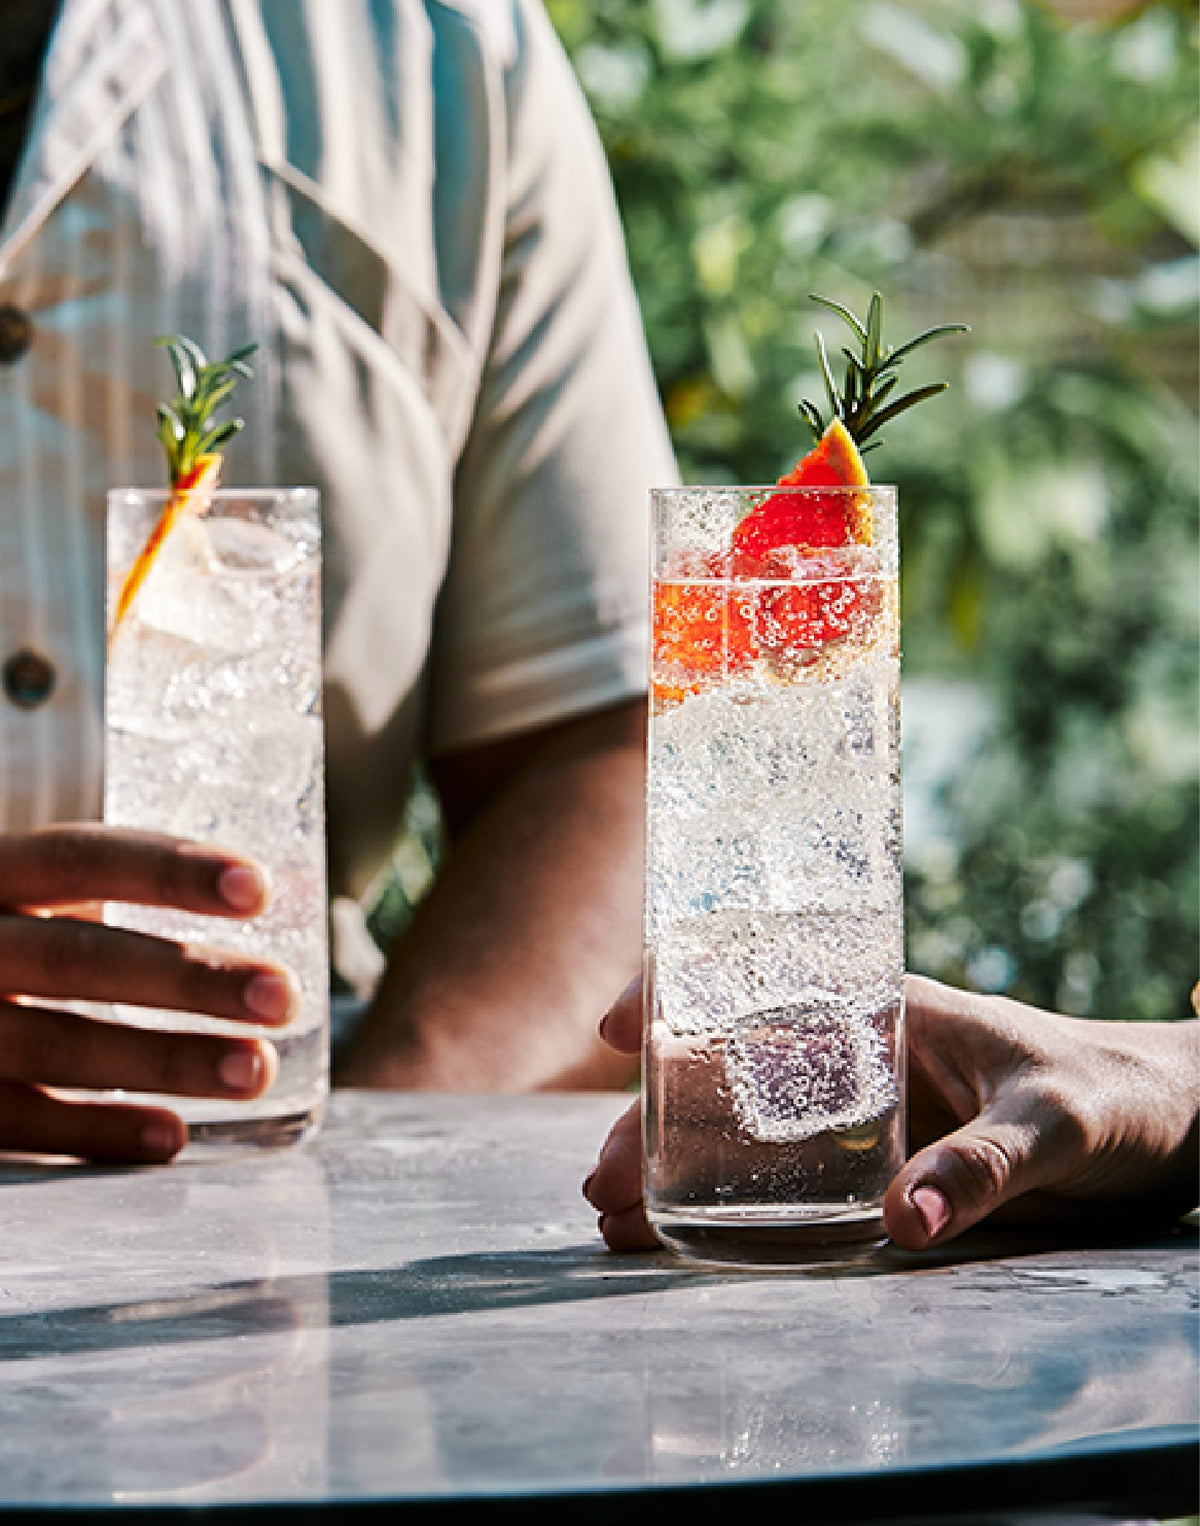 The Botanist & Tonic with Grapefruit and Rosemary